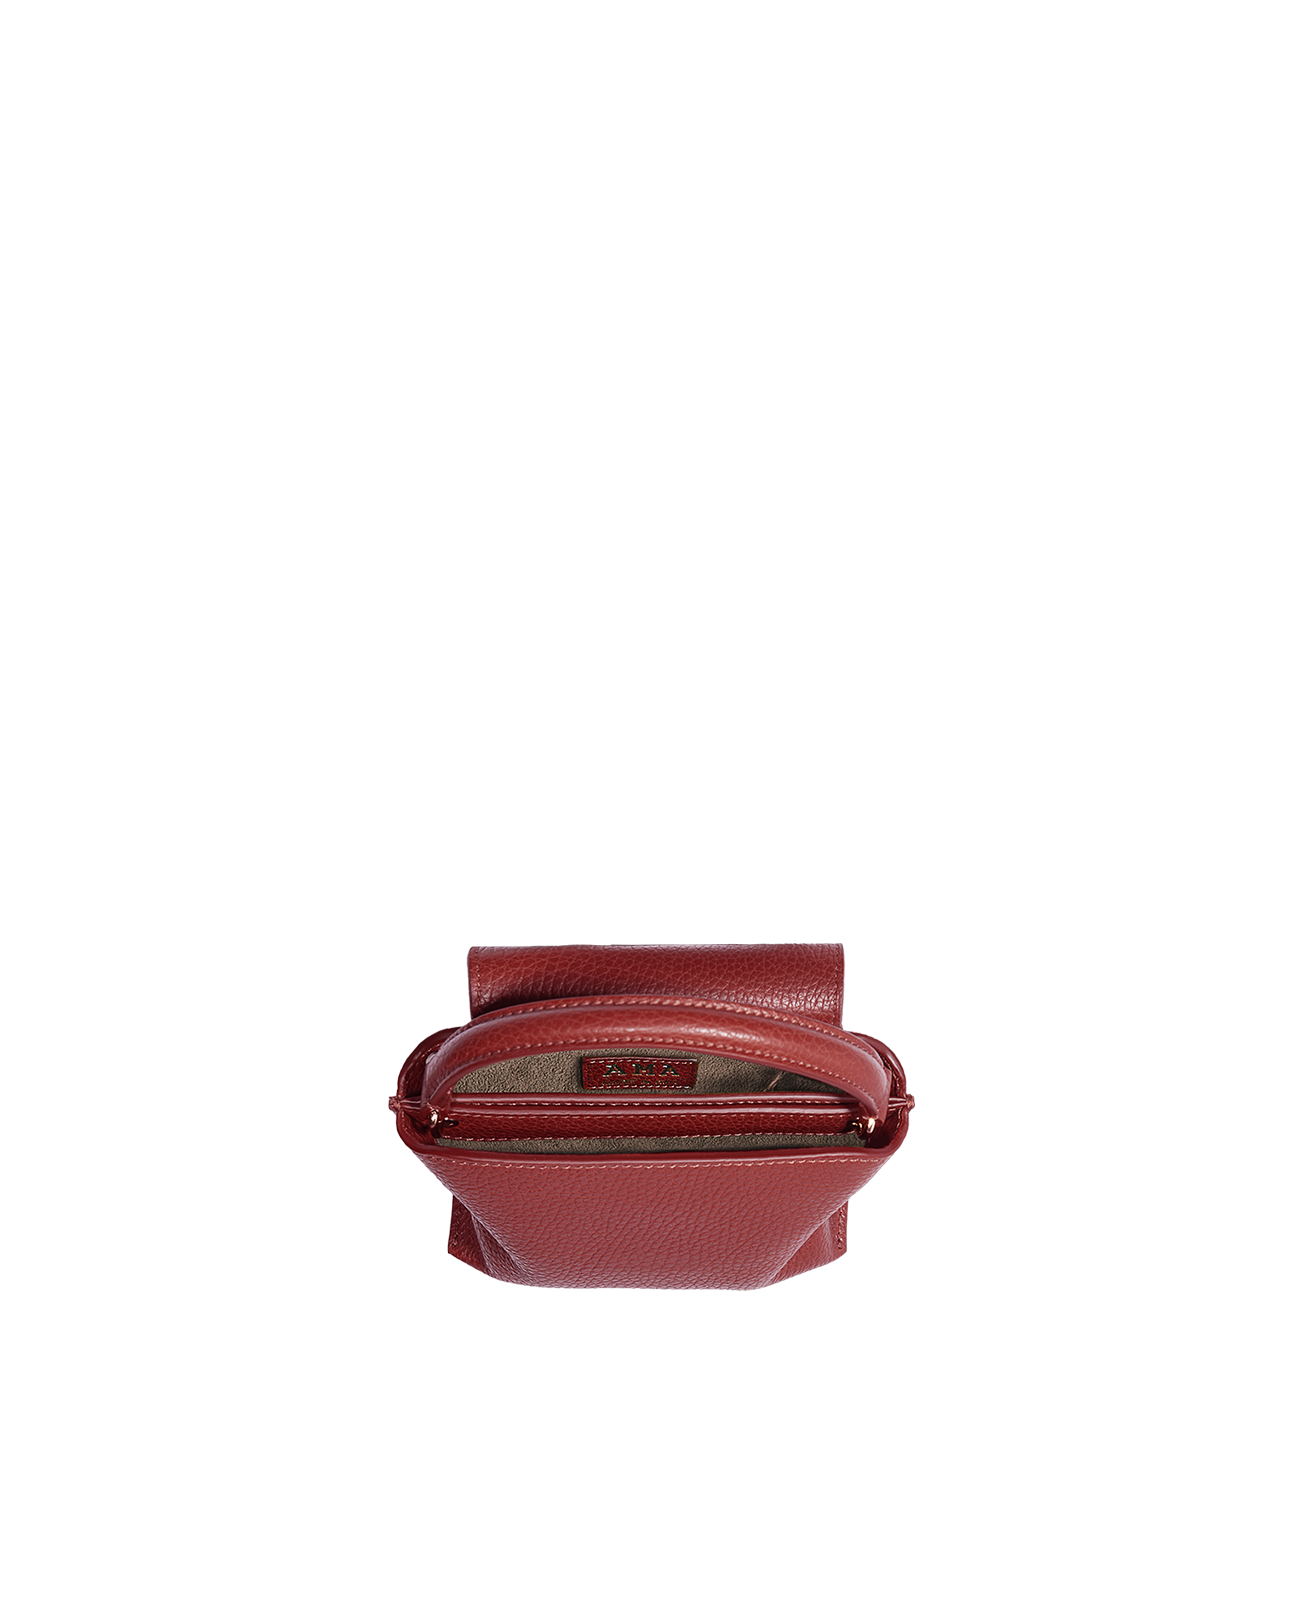 Cross-body bag in Italian full-grain leather, semi-aniline calf Italian leather with detachable shoulder strap.Three compartments, zip pocket in the back compartment. Magnetic flap closure with logo. Color: Dark Red. Size:Mini